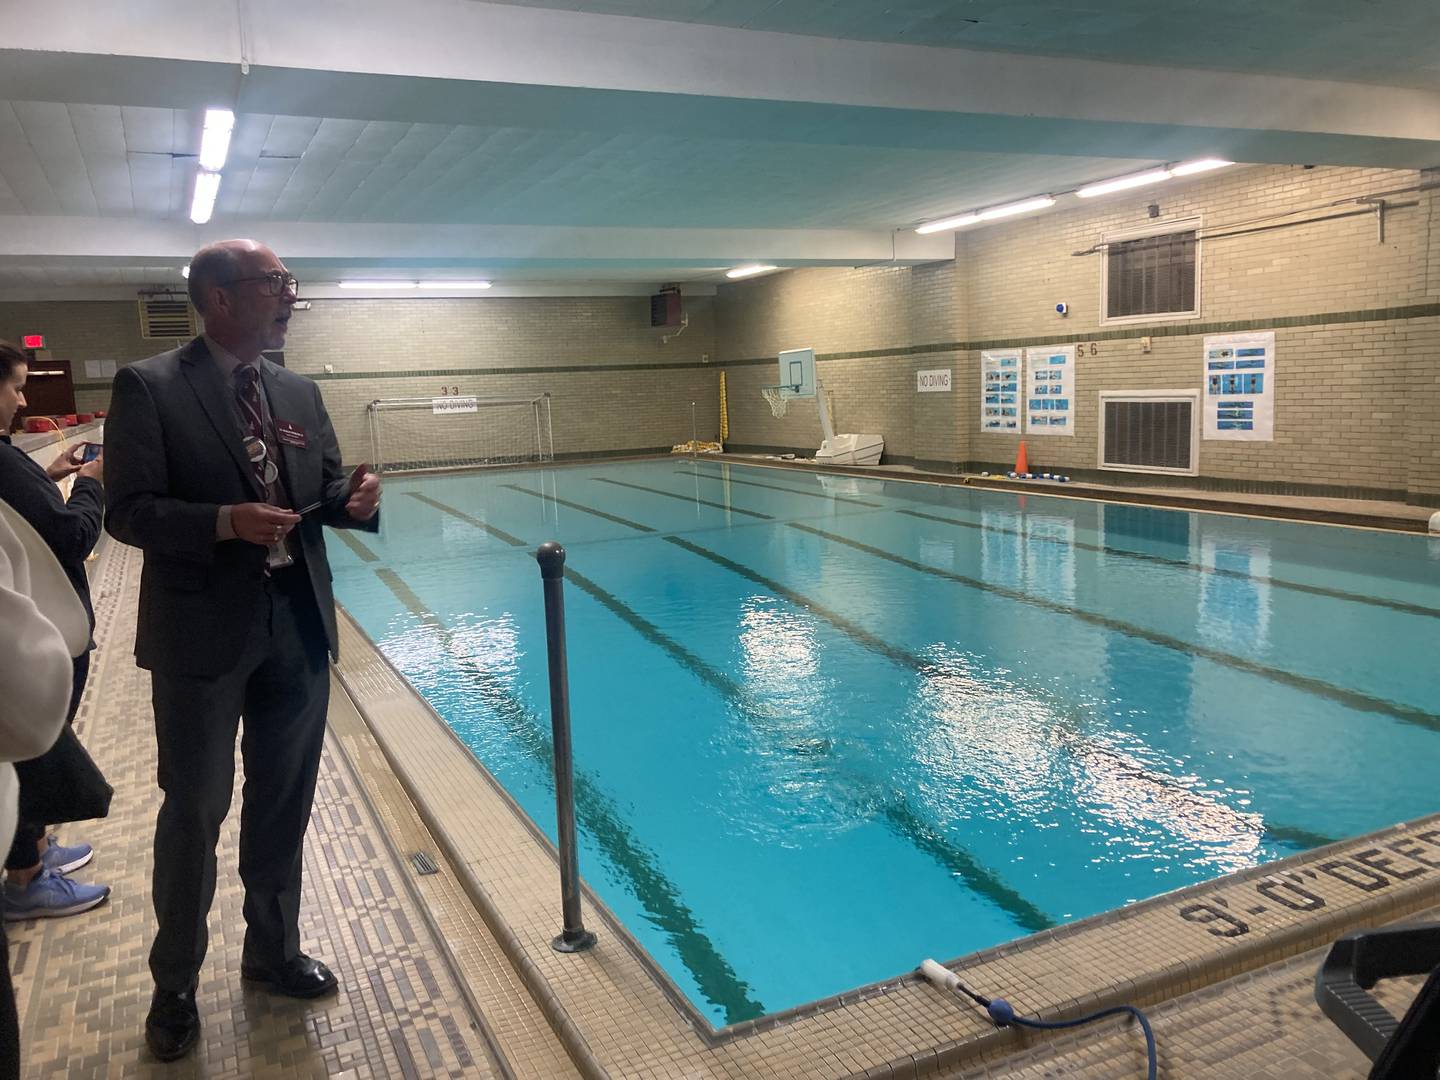 Lockport School District 205 Superintendent Dr. Robert McBride guides a tour through the Lockport Township High School's Central Campus pool area in September 2023.  The public tour was held prior to a school board meeting to show what renovations and improvements are needed at the 114-year-old building.